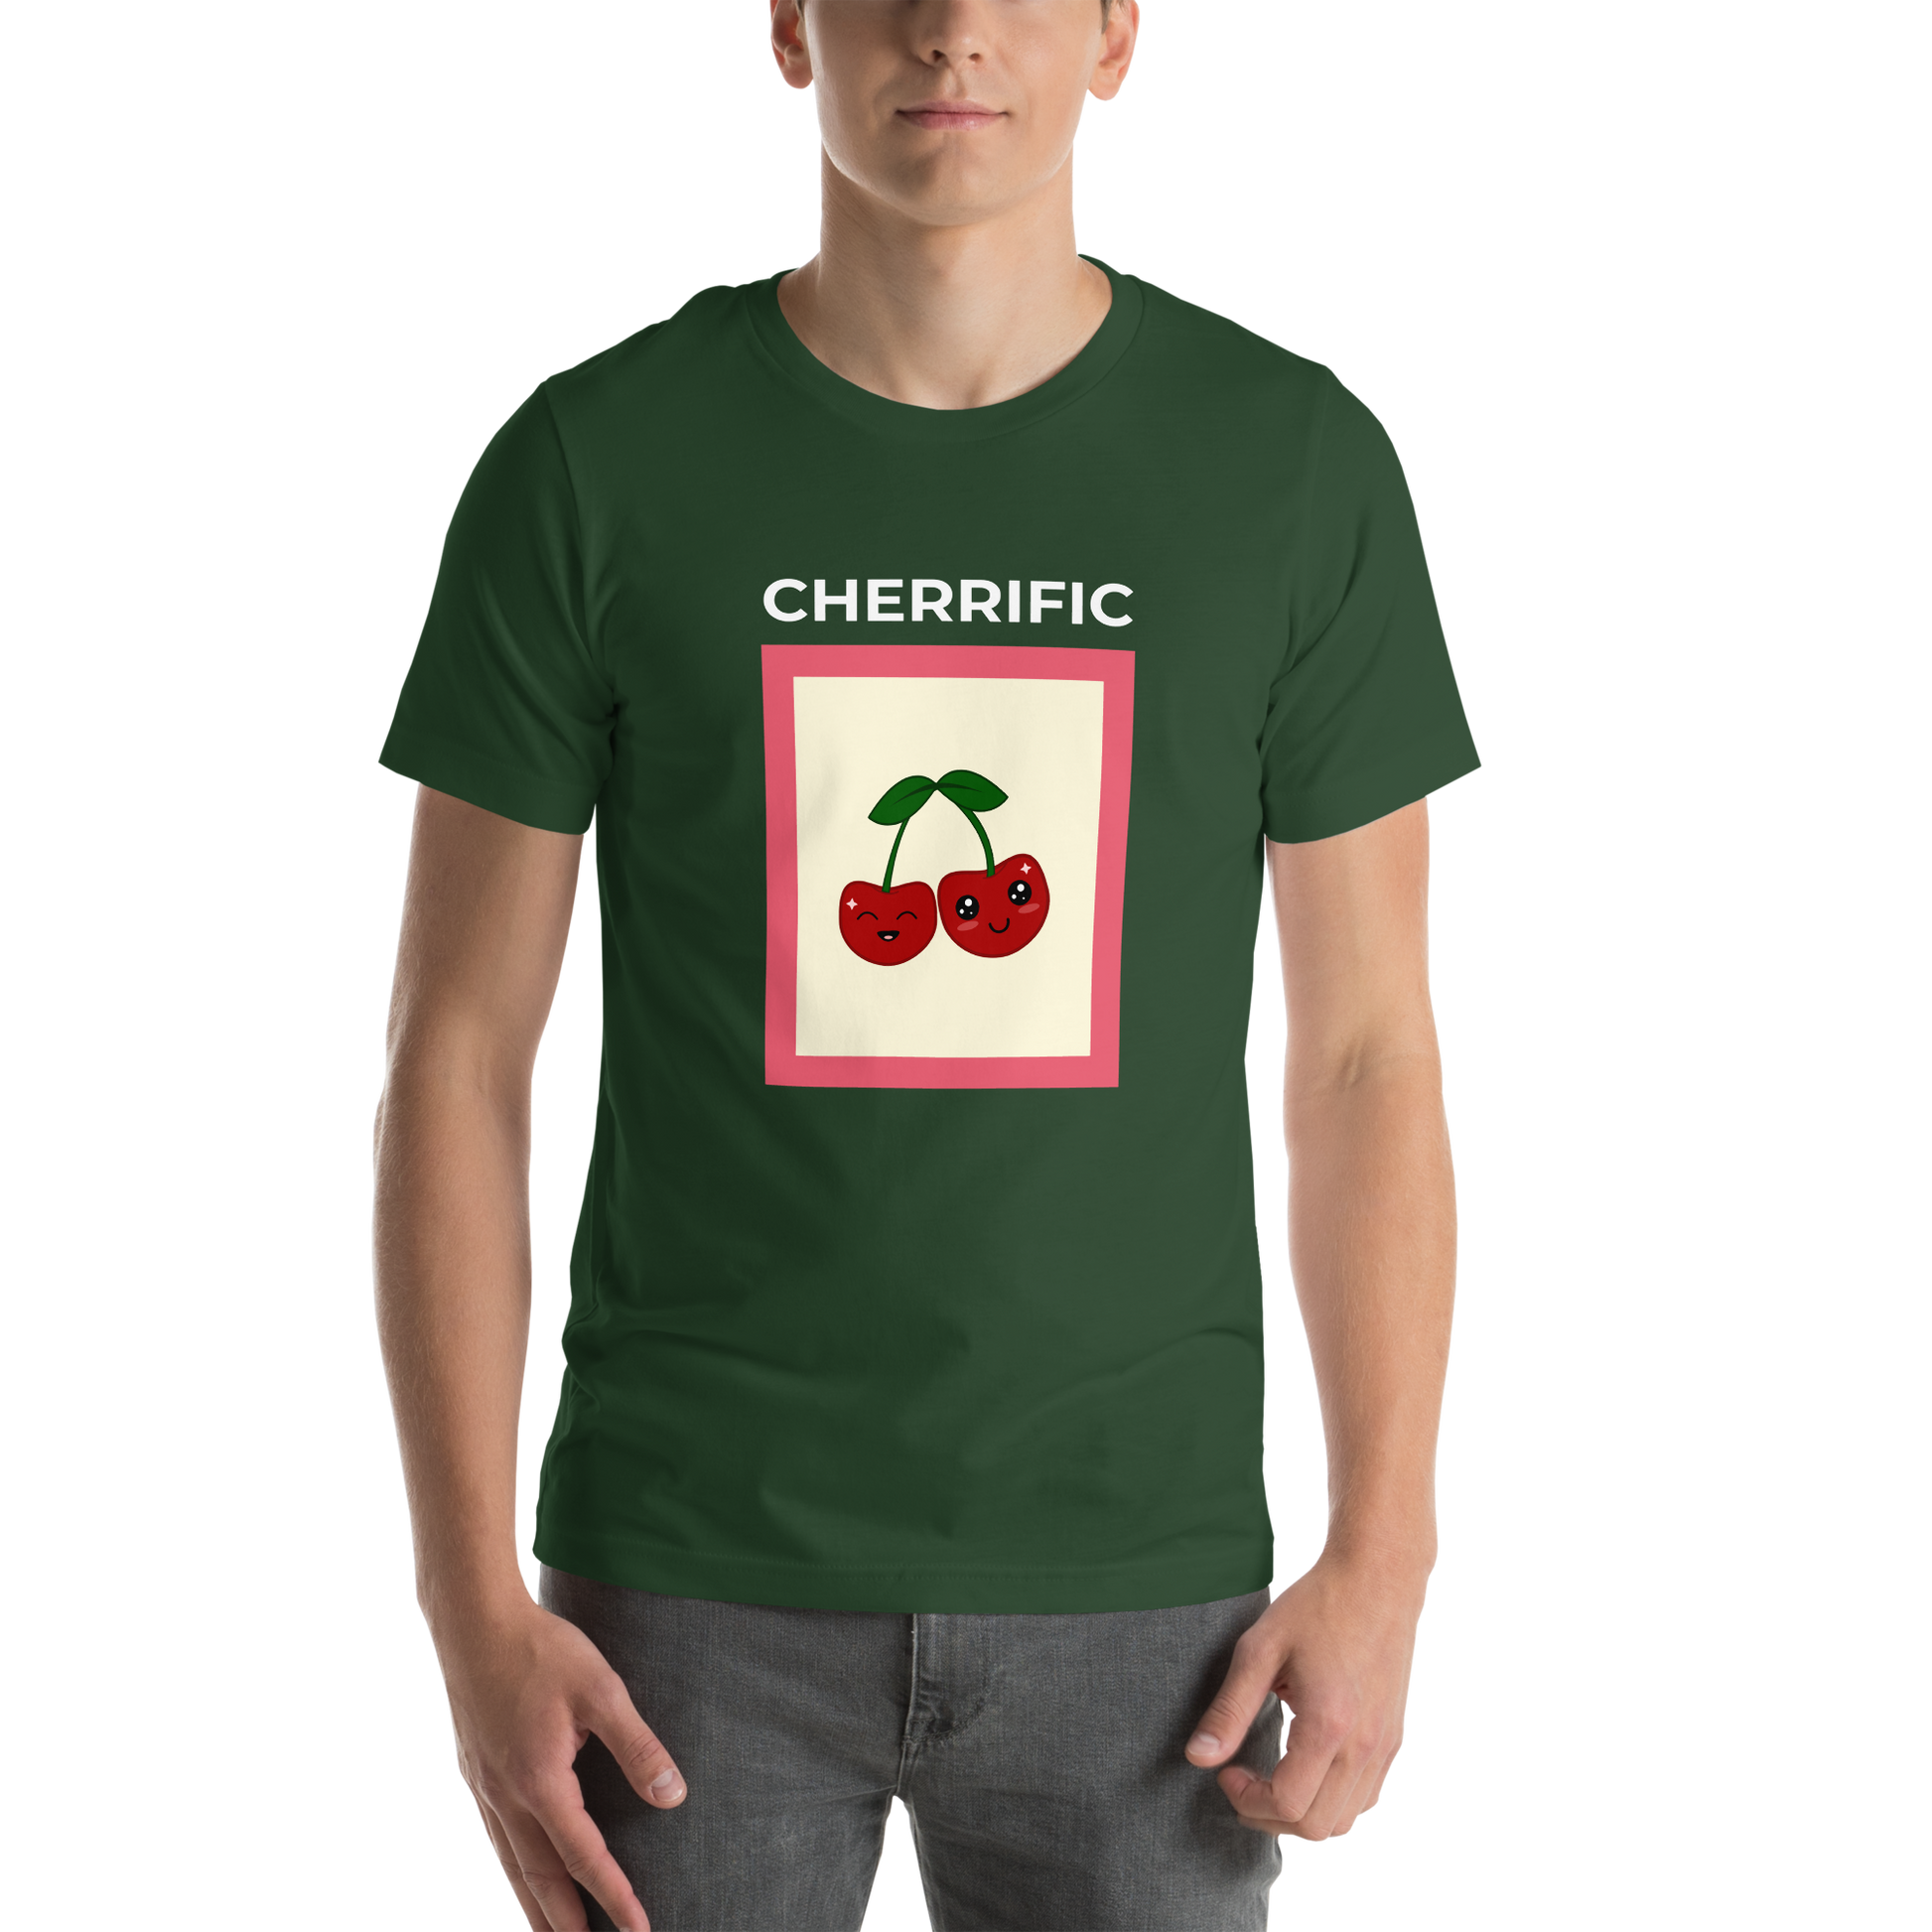 Man wearing a Forest Green Premium Cherry Tee featuring a Cherrific graphic on the chest - Funny Graphic Cherry Tees - Boozy Fox